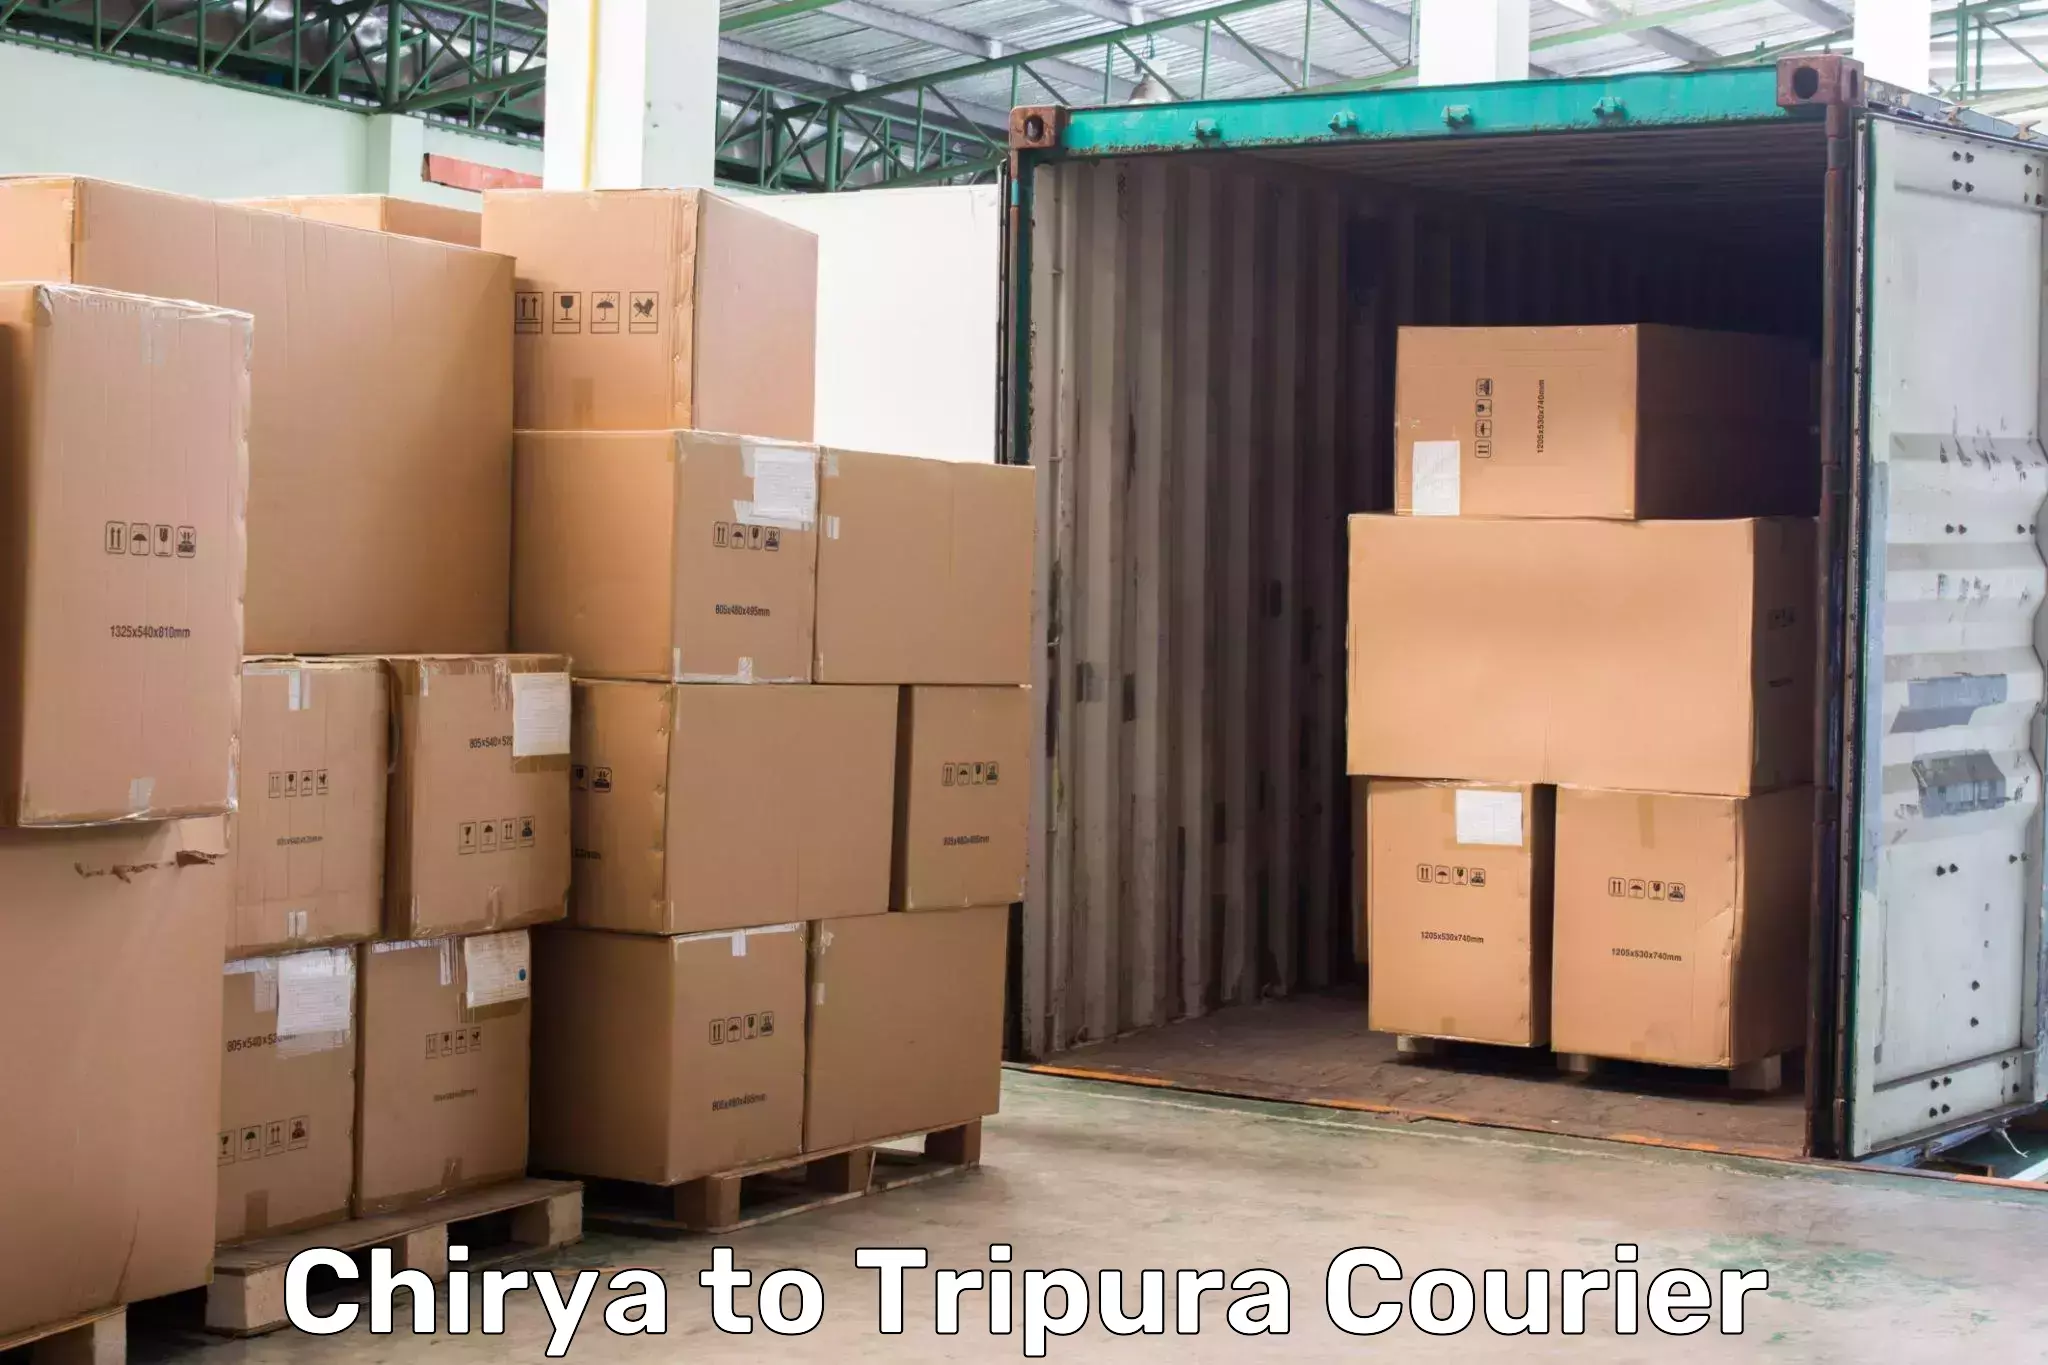 Courier service comparison Chirya to Udaipur Tripura